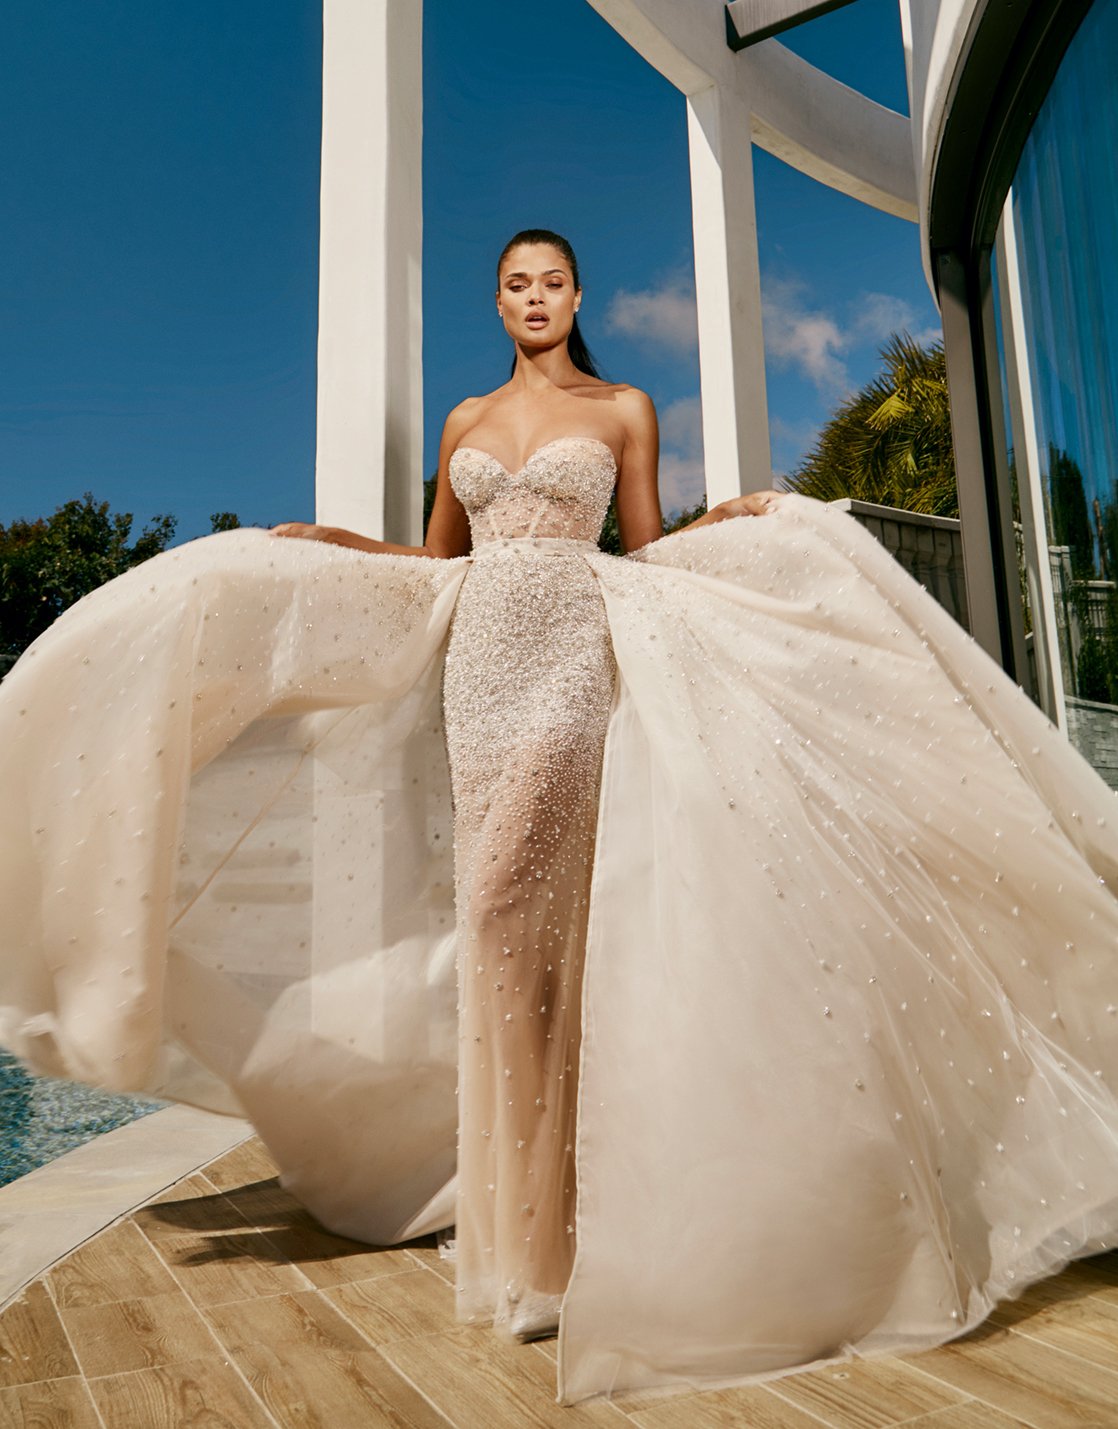 A bride holds her sparkling skirt that is blowing in the wind and she wears a Galia Lahav gown that is strapless and beige with rhinestones covering it.